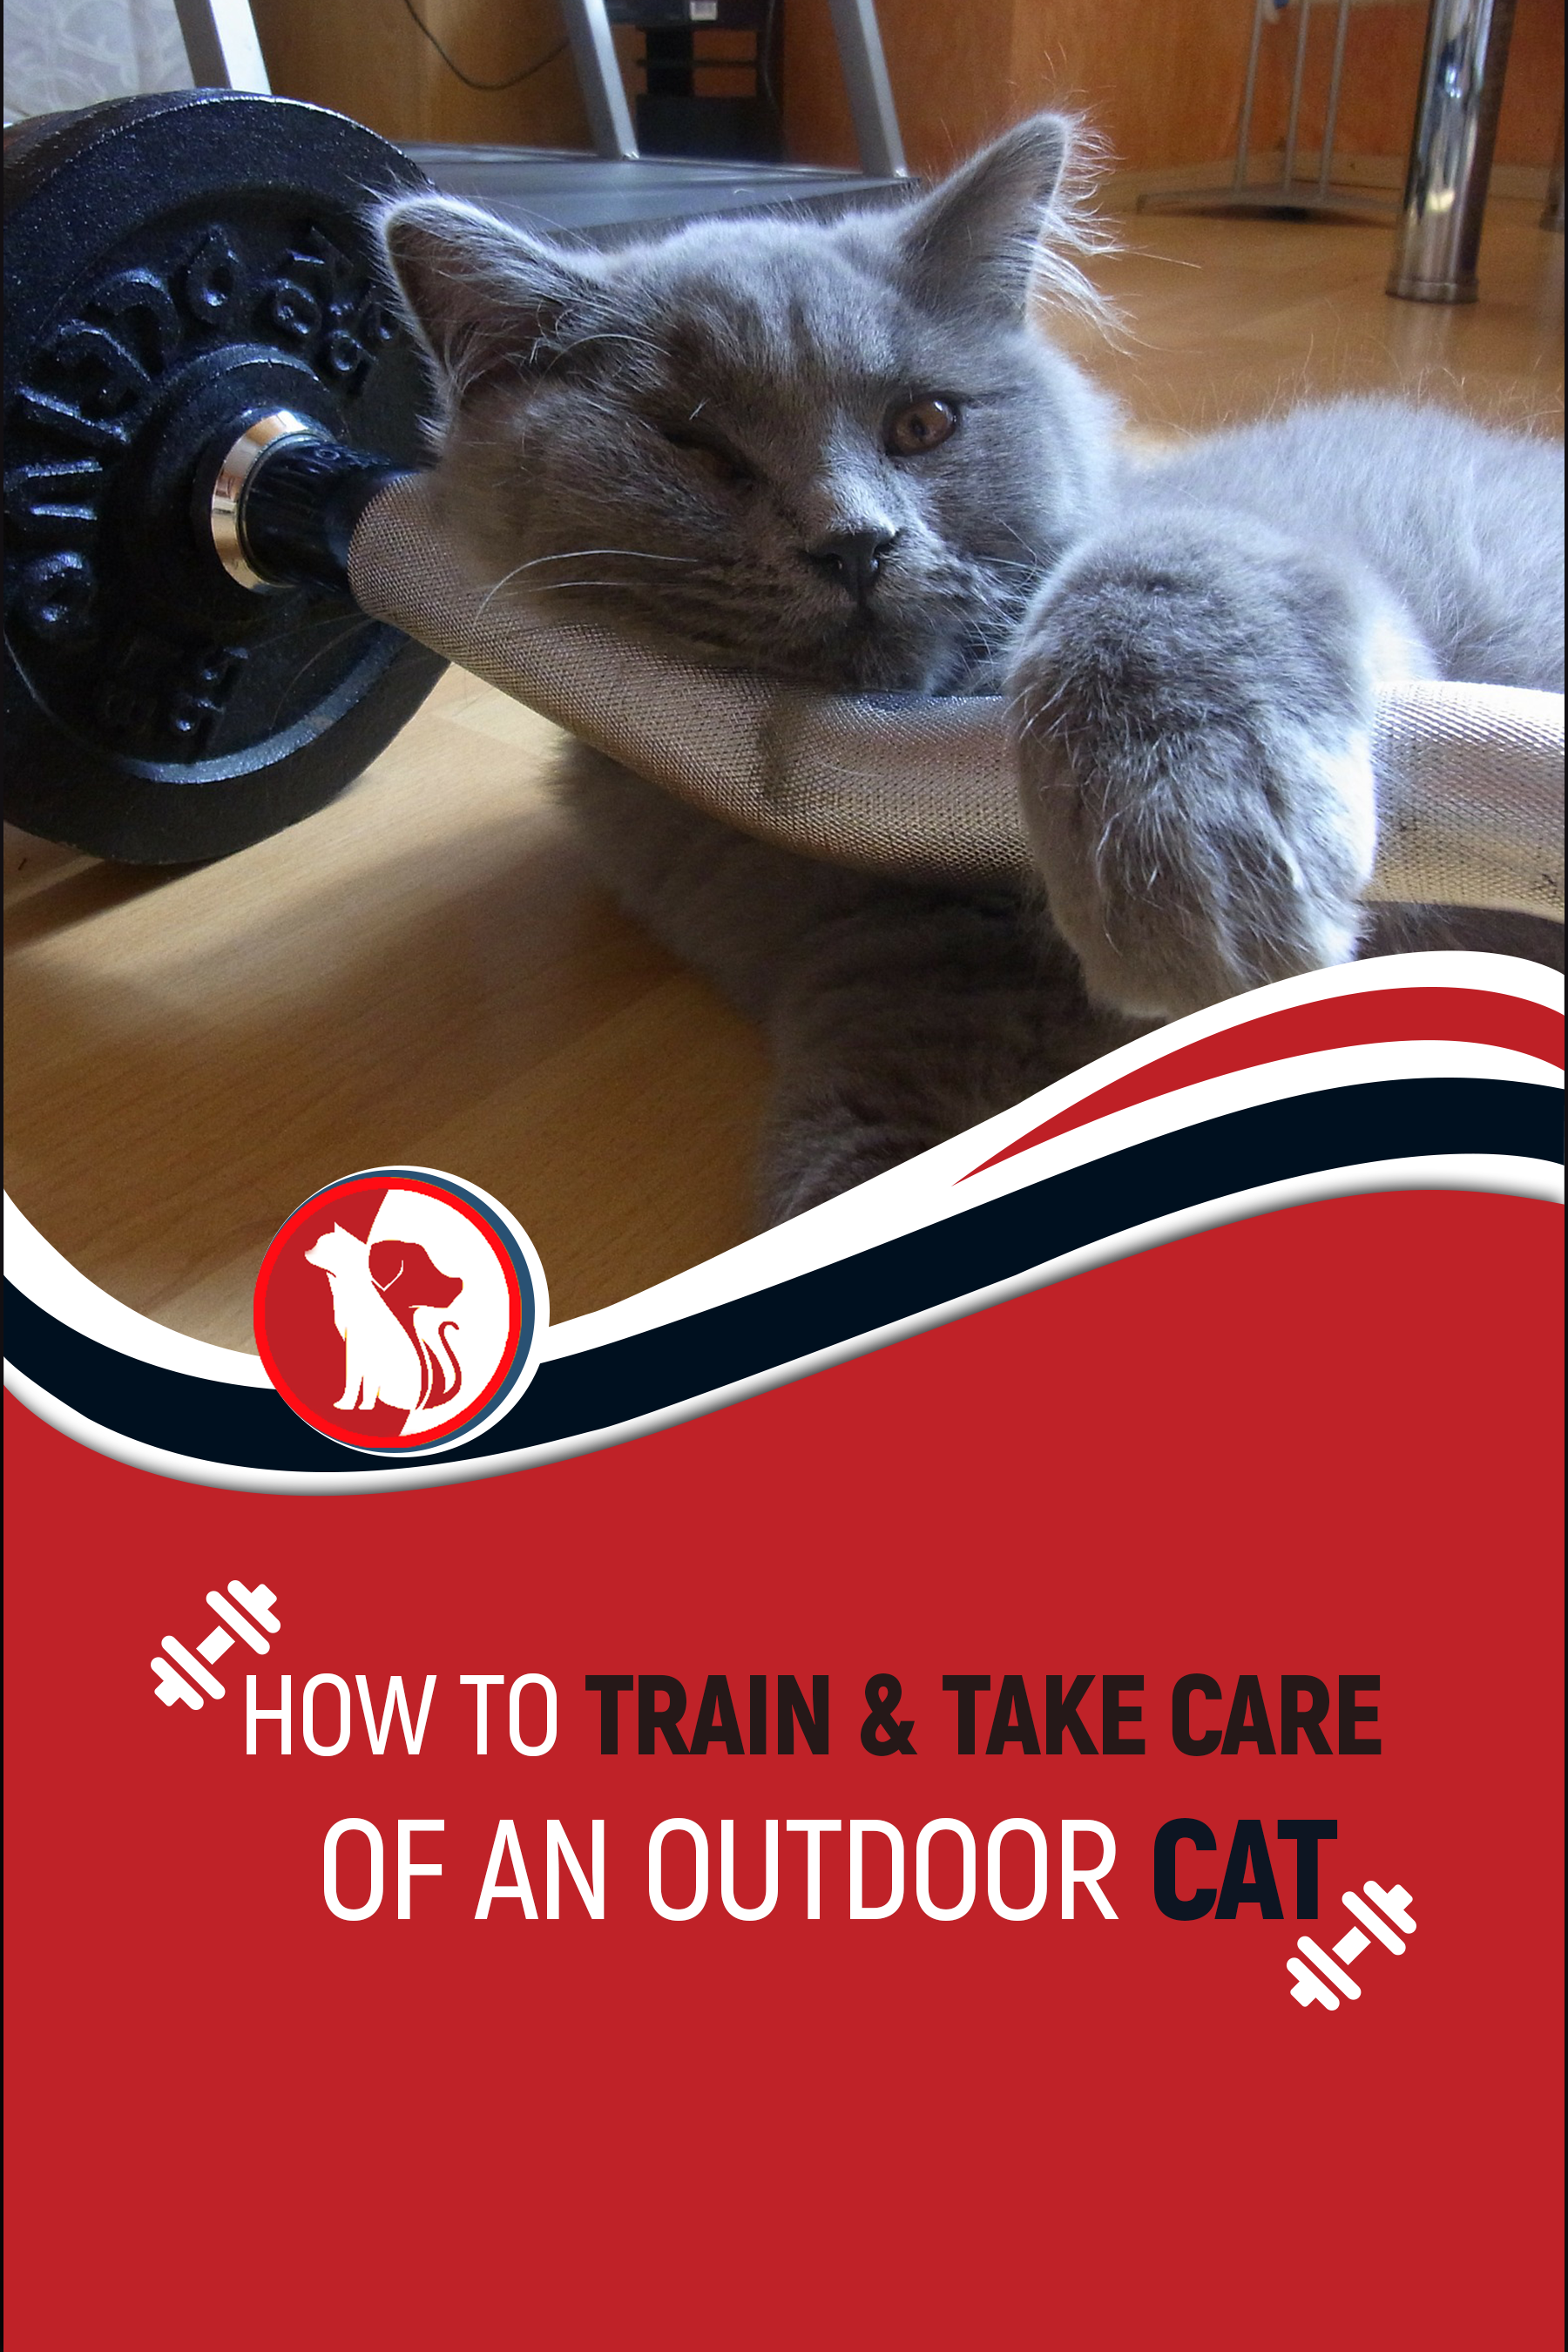 How to Train & Take Care of an Outdoor Cat